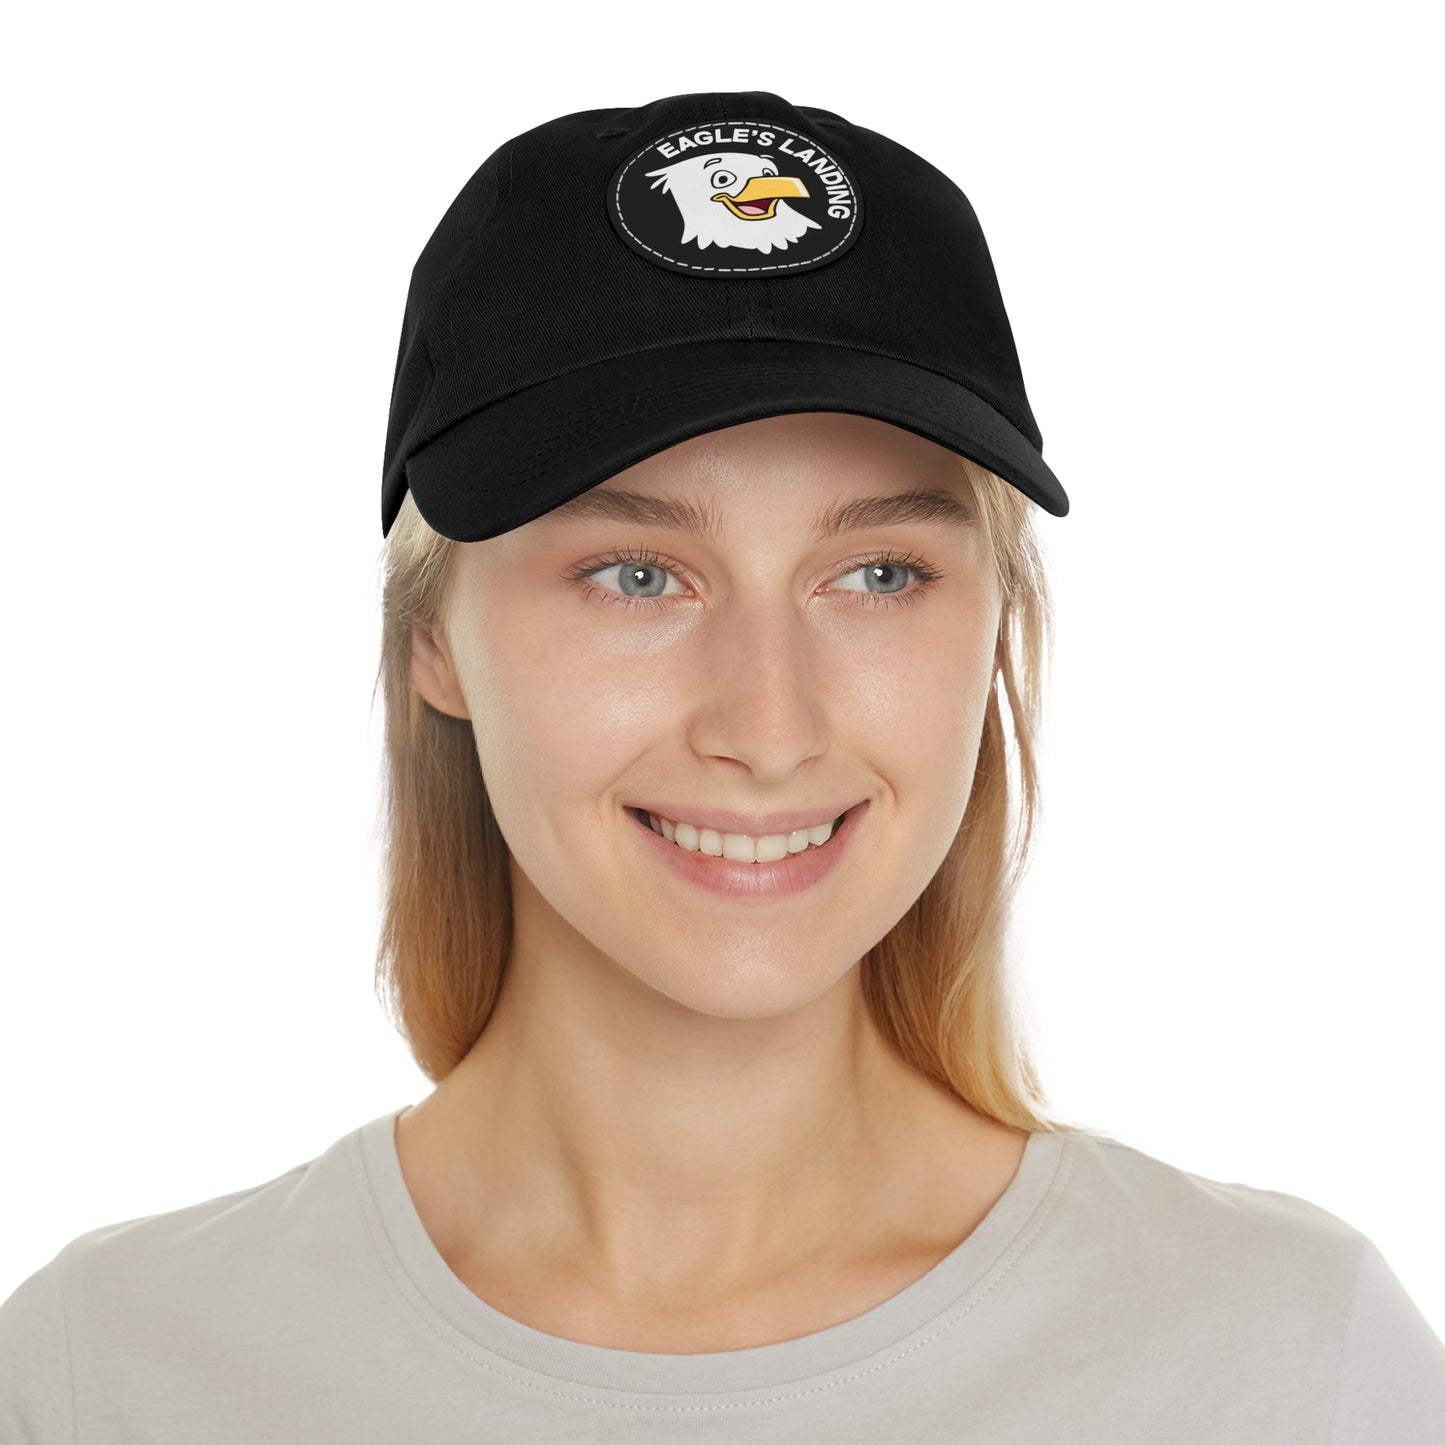 ADULT Hat with Leather Patch (Round)